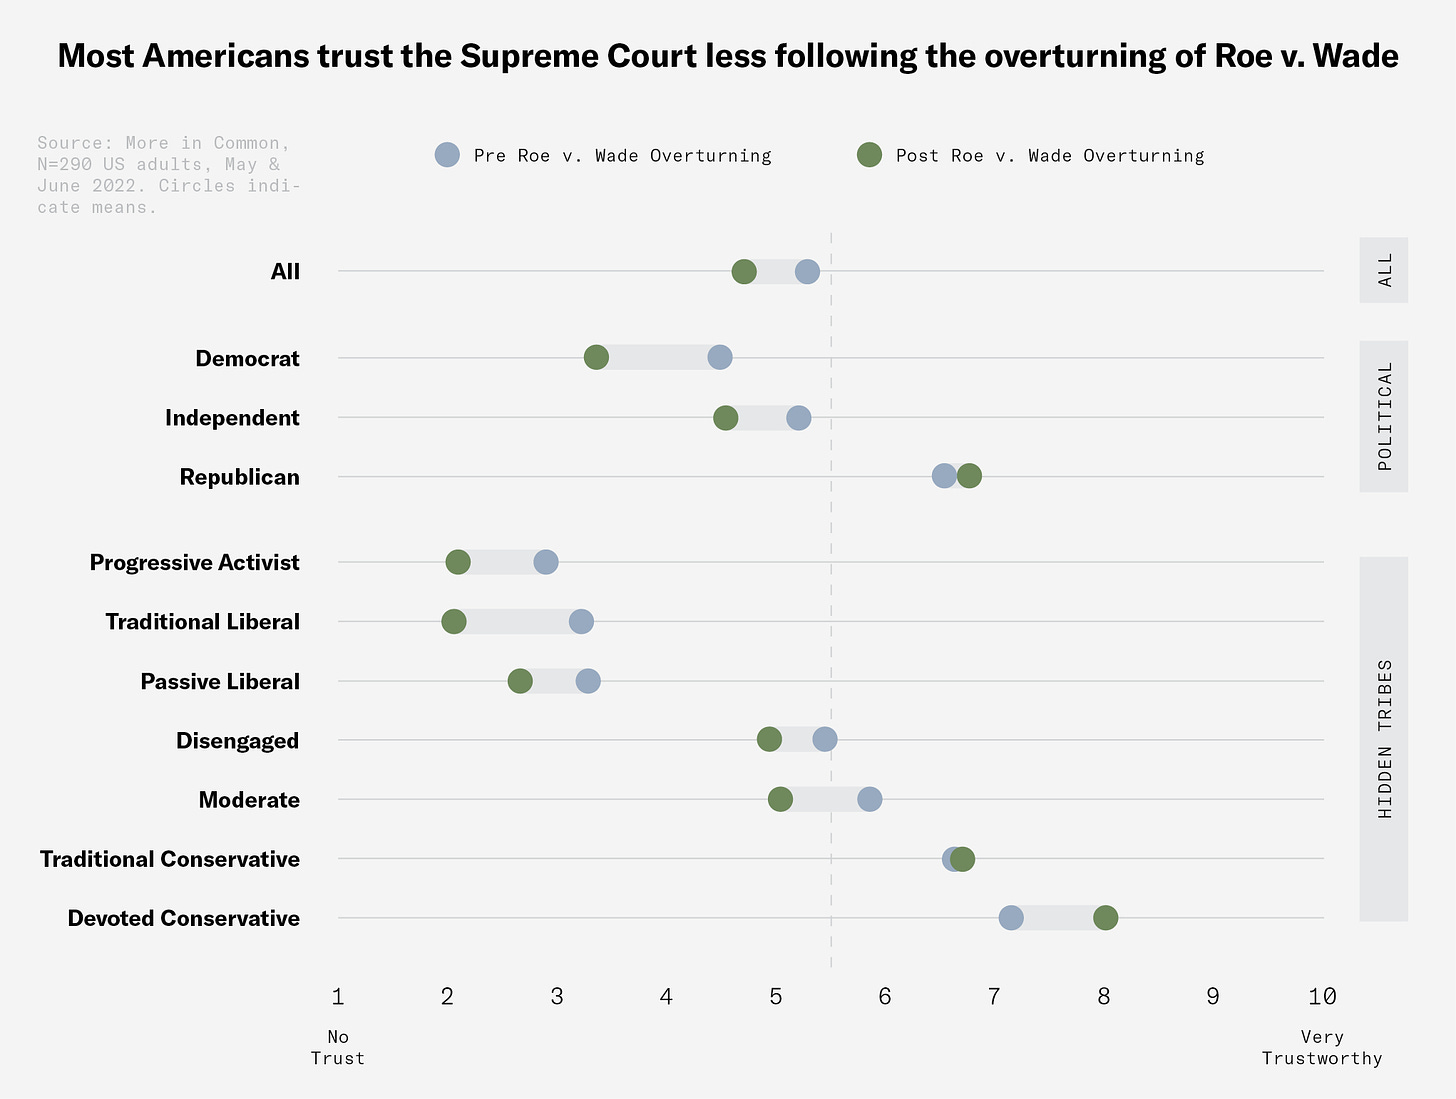 Most Americans trust the Supreme Court lesss following the overturning of Roe v. Wade. Source: More in Common, N=290 US adults, May & June 2022. Circles indicate means.